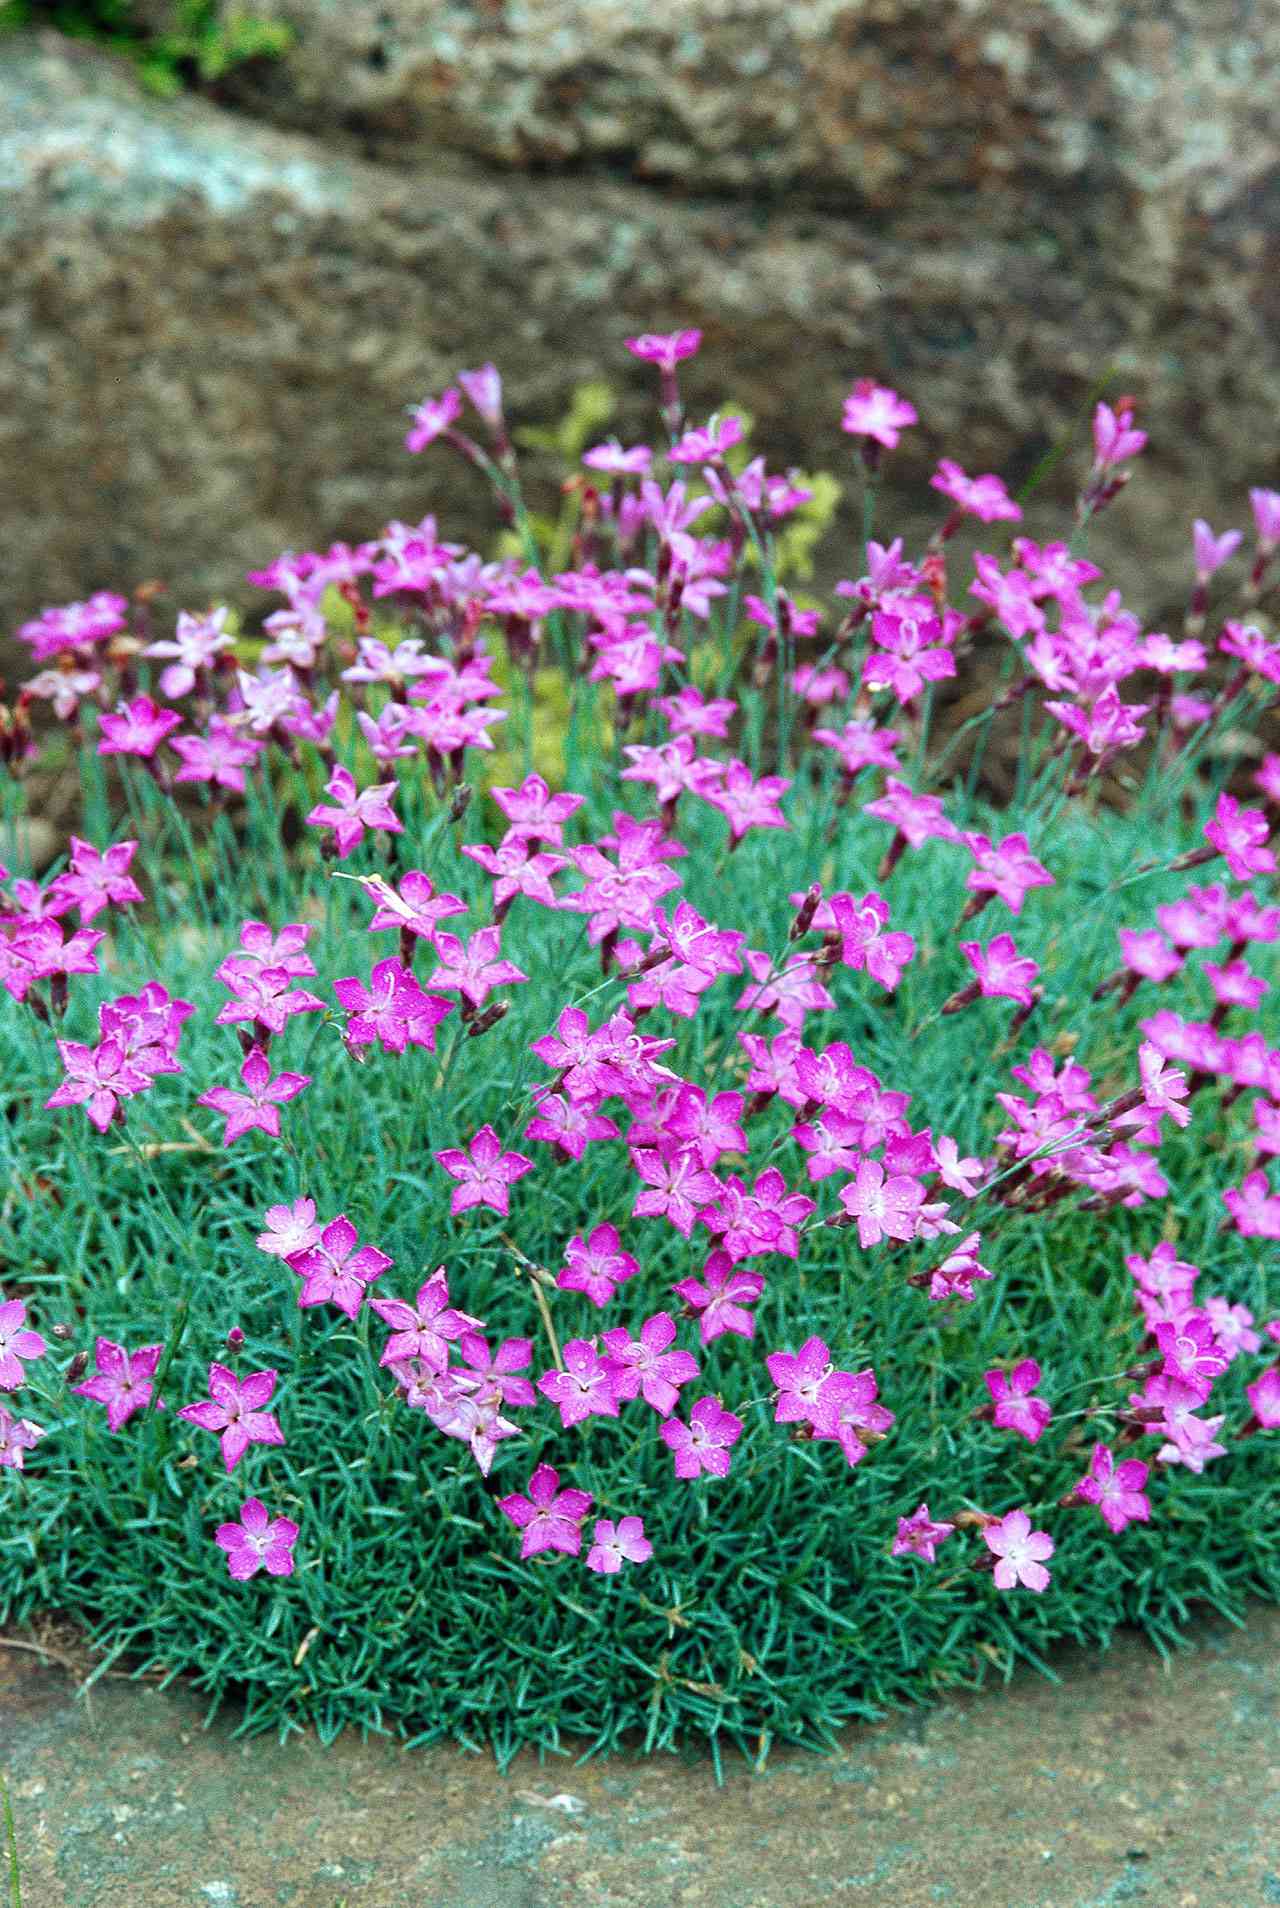 Drought Tolerant Groundcovers Better, Ground Cover Perennials For Sun